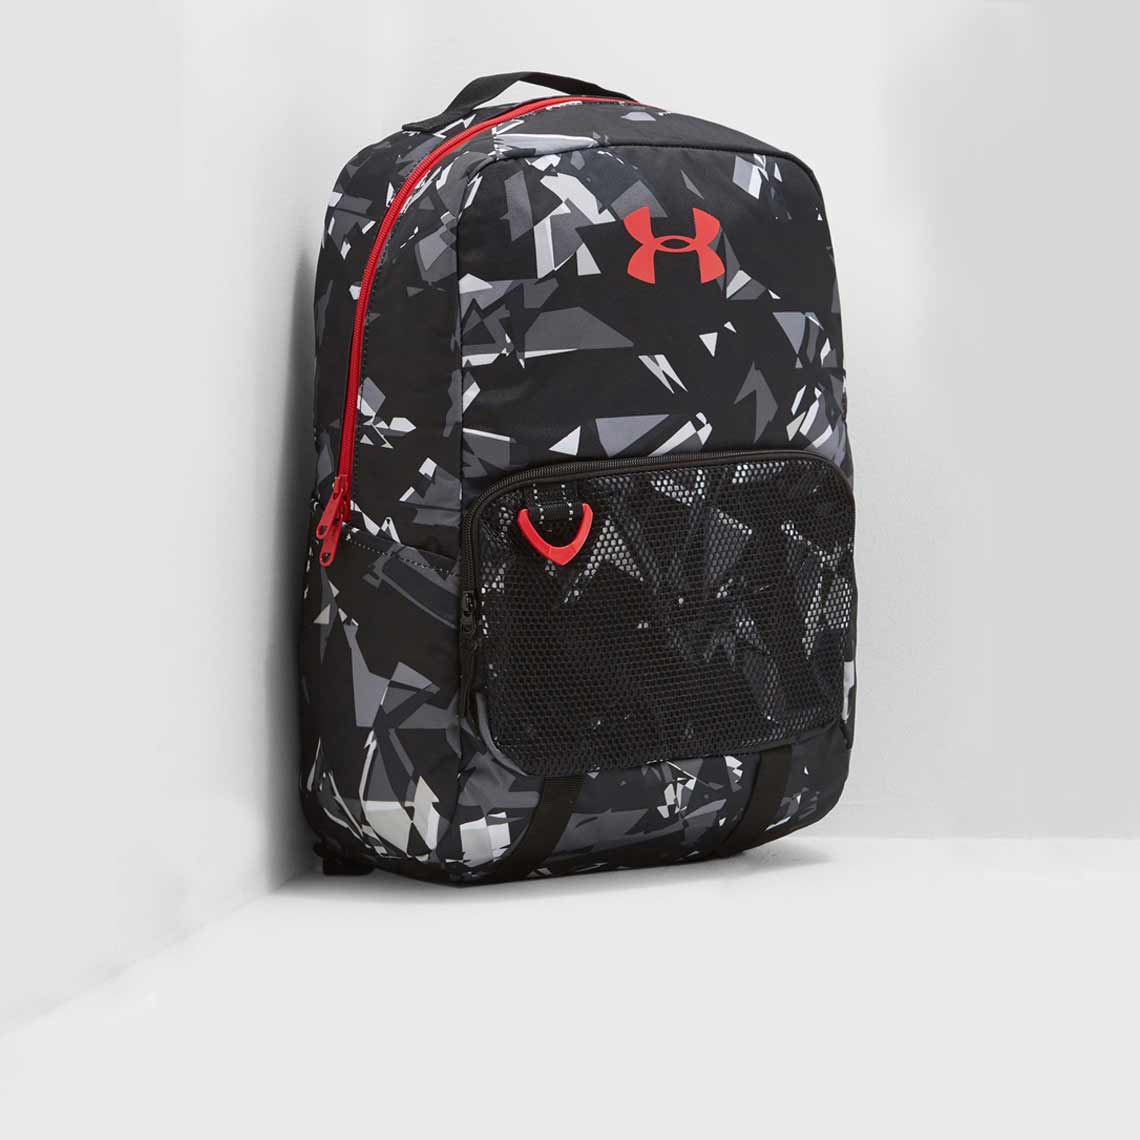 UNDER ARMOUR Black / One Size Under Armour baby backpack model